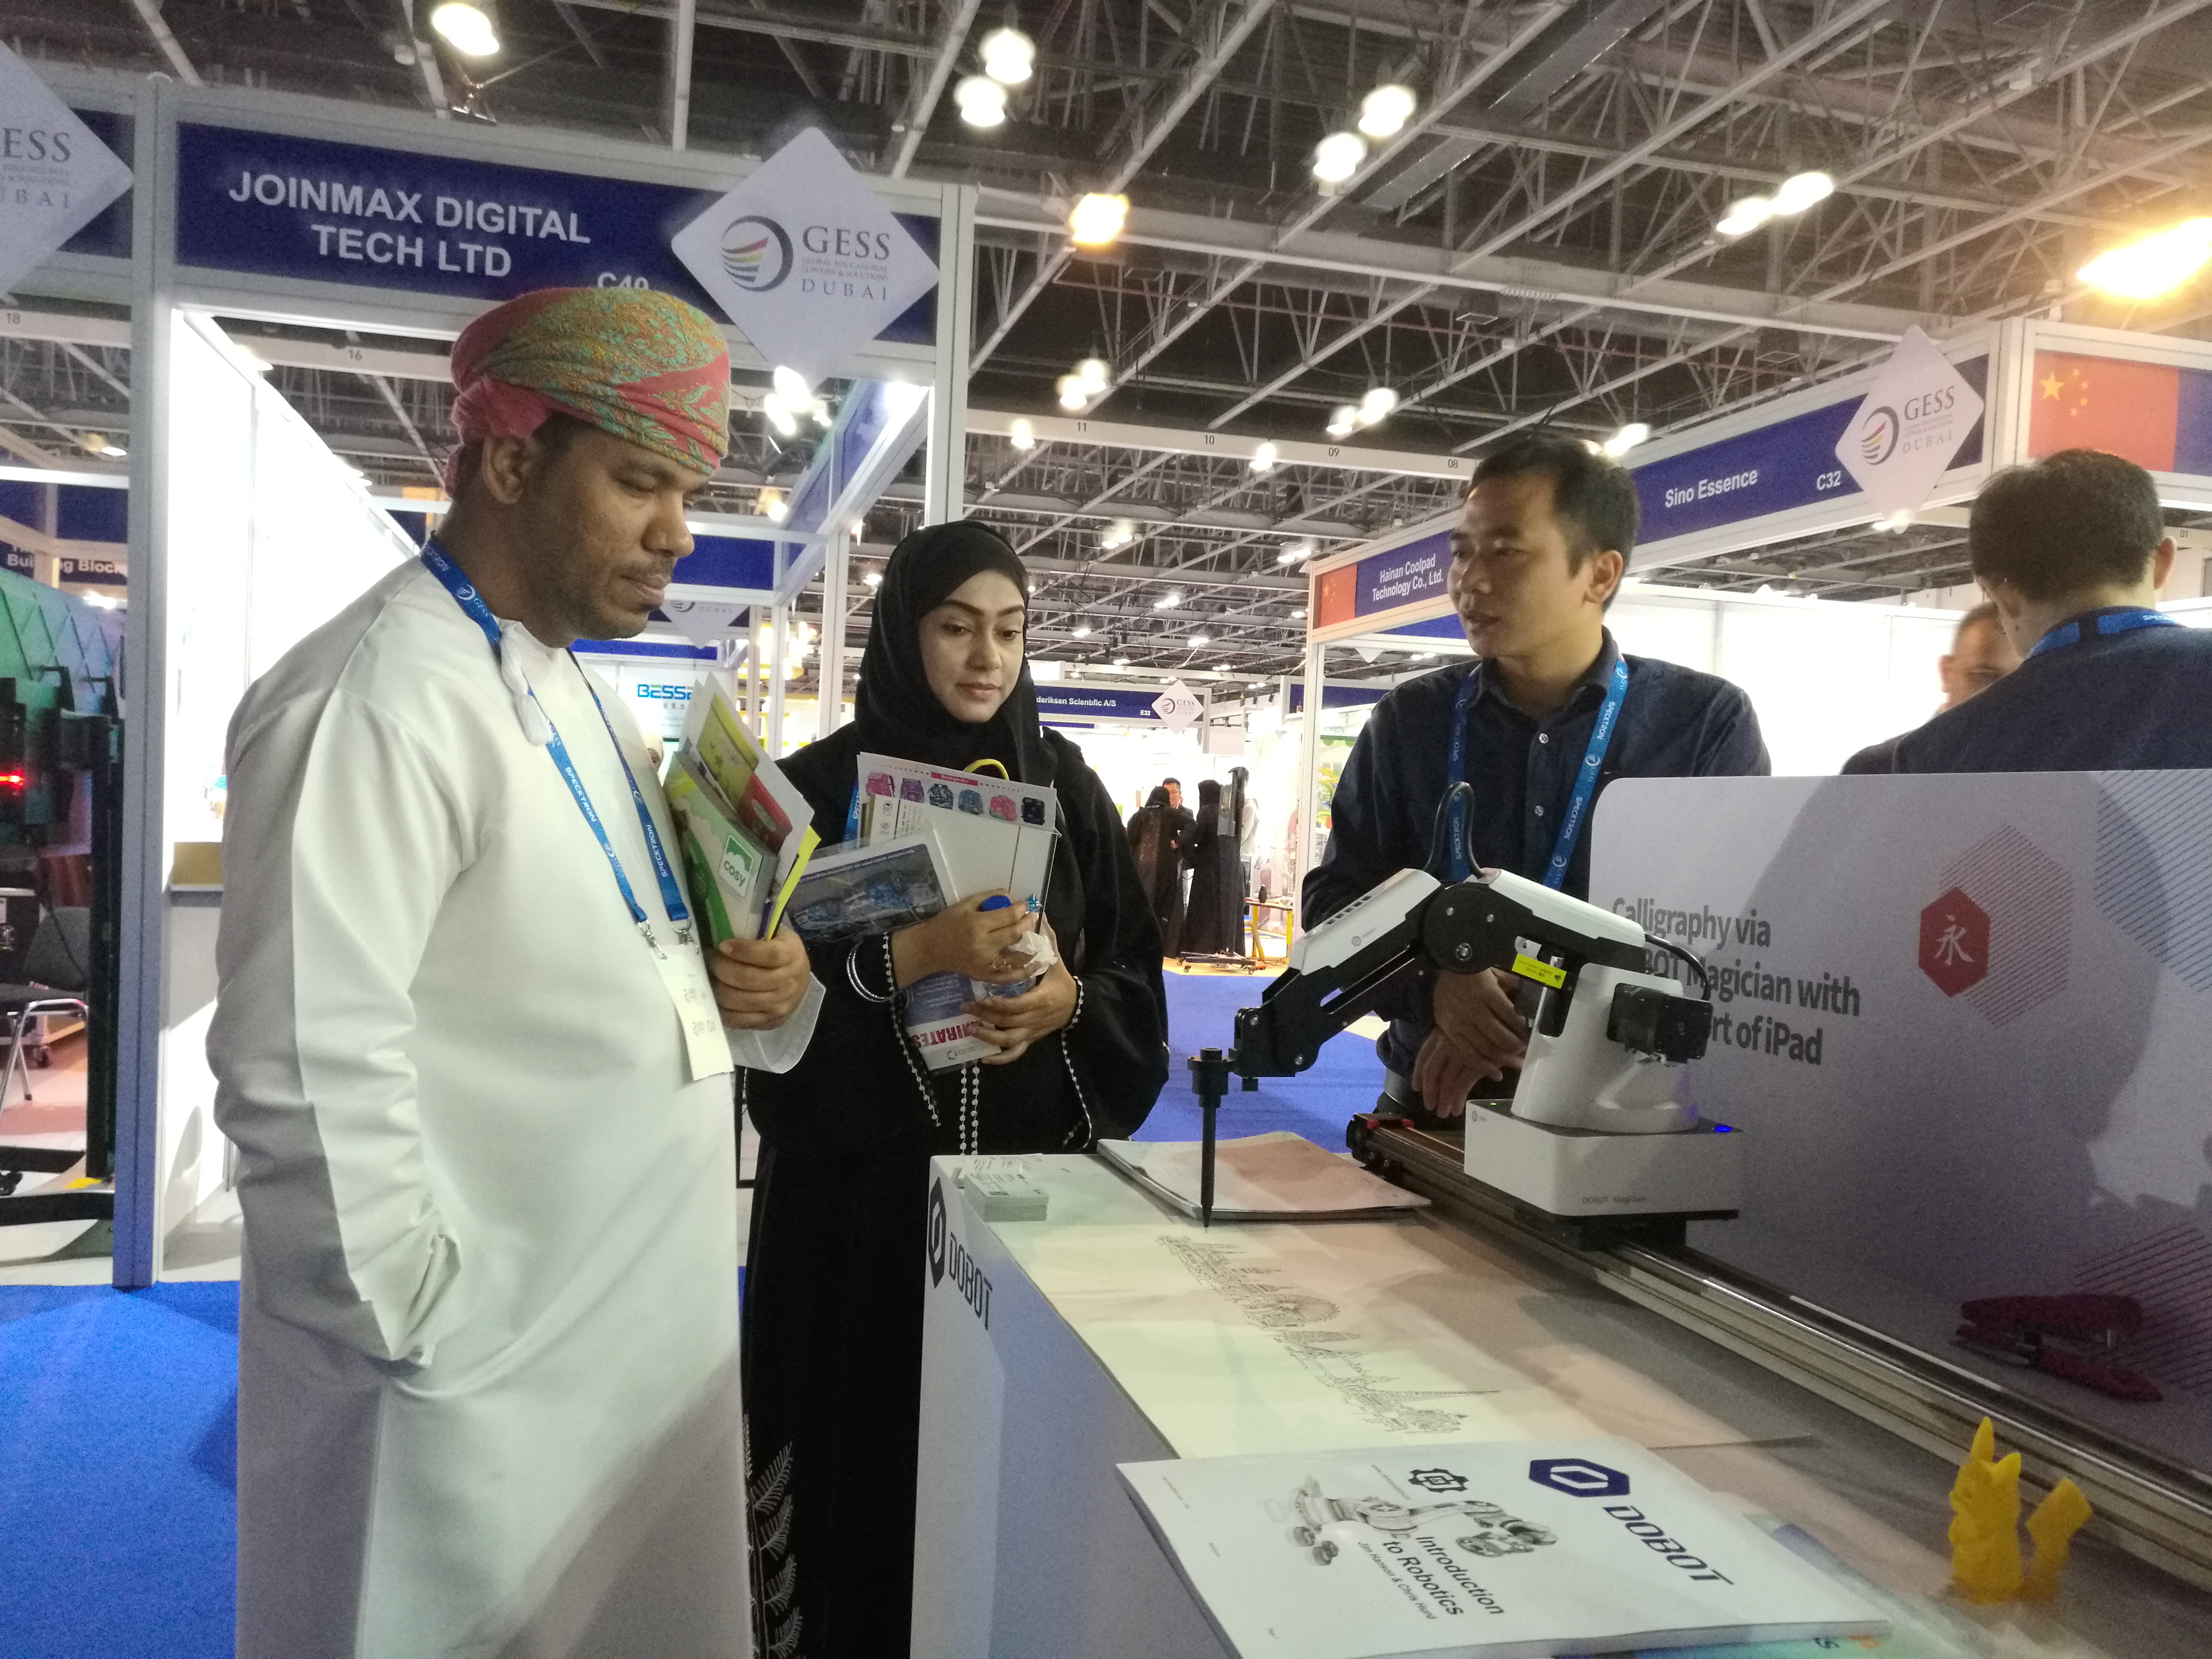 Experience the All-in-one Robot Education Solution from Dobot at GESS 2019